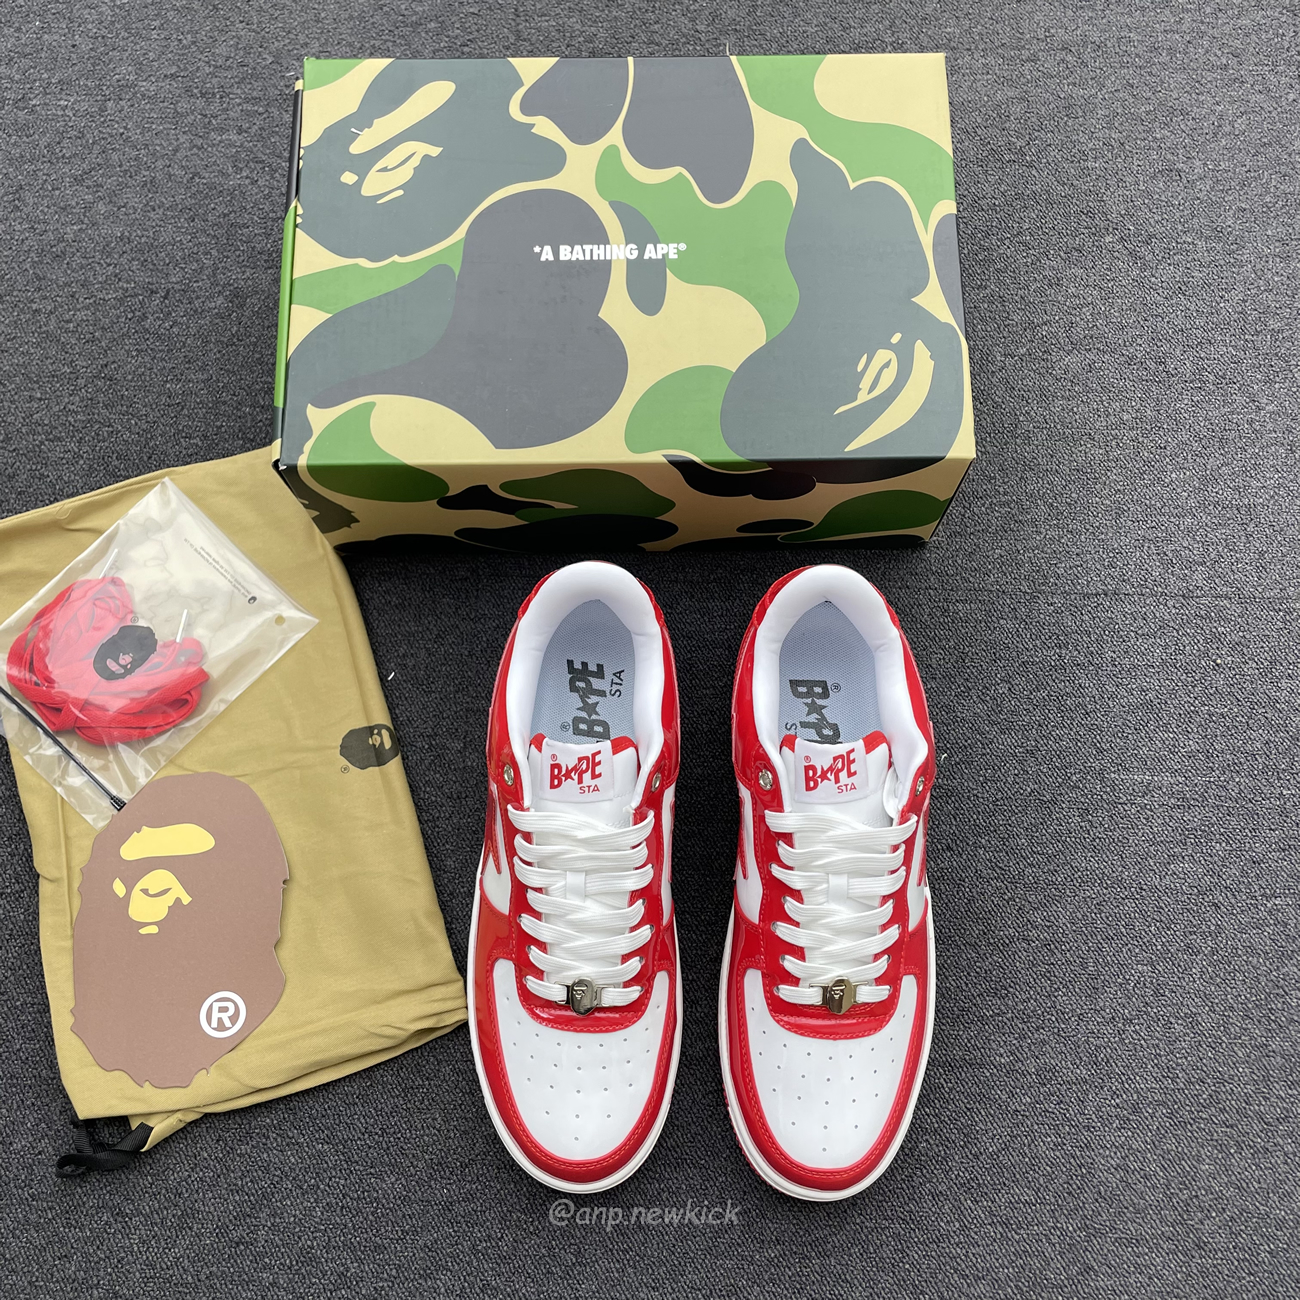 A Bathing Ape Bape Sta Patent Leather White Red 1i70 291 021 (11) - www.newkick.org